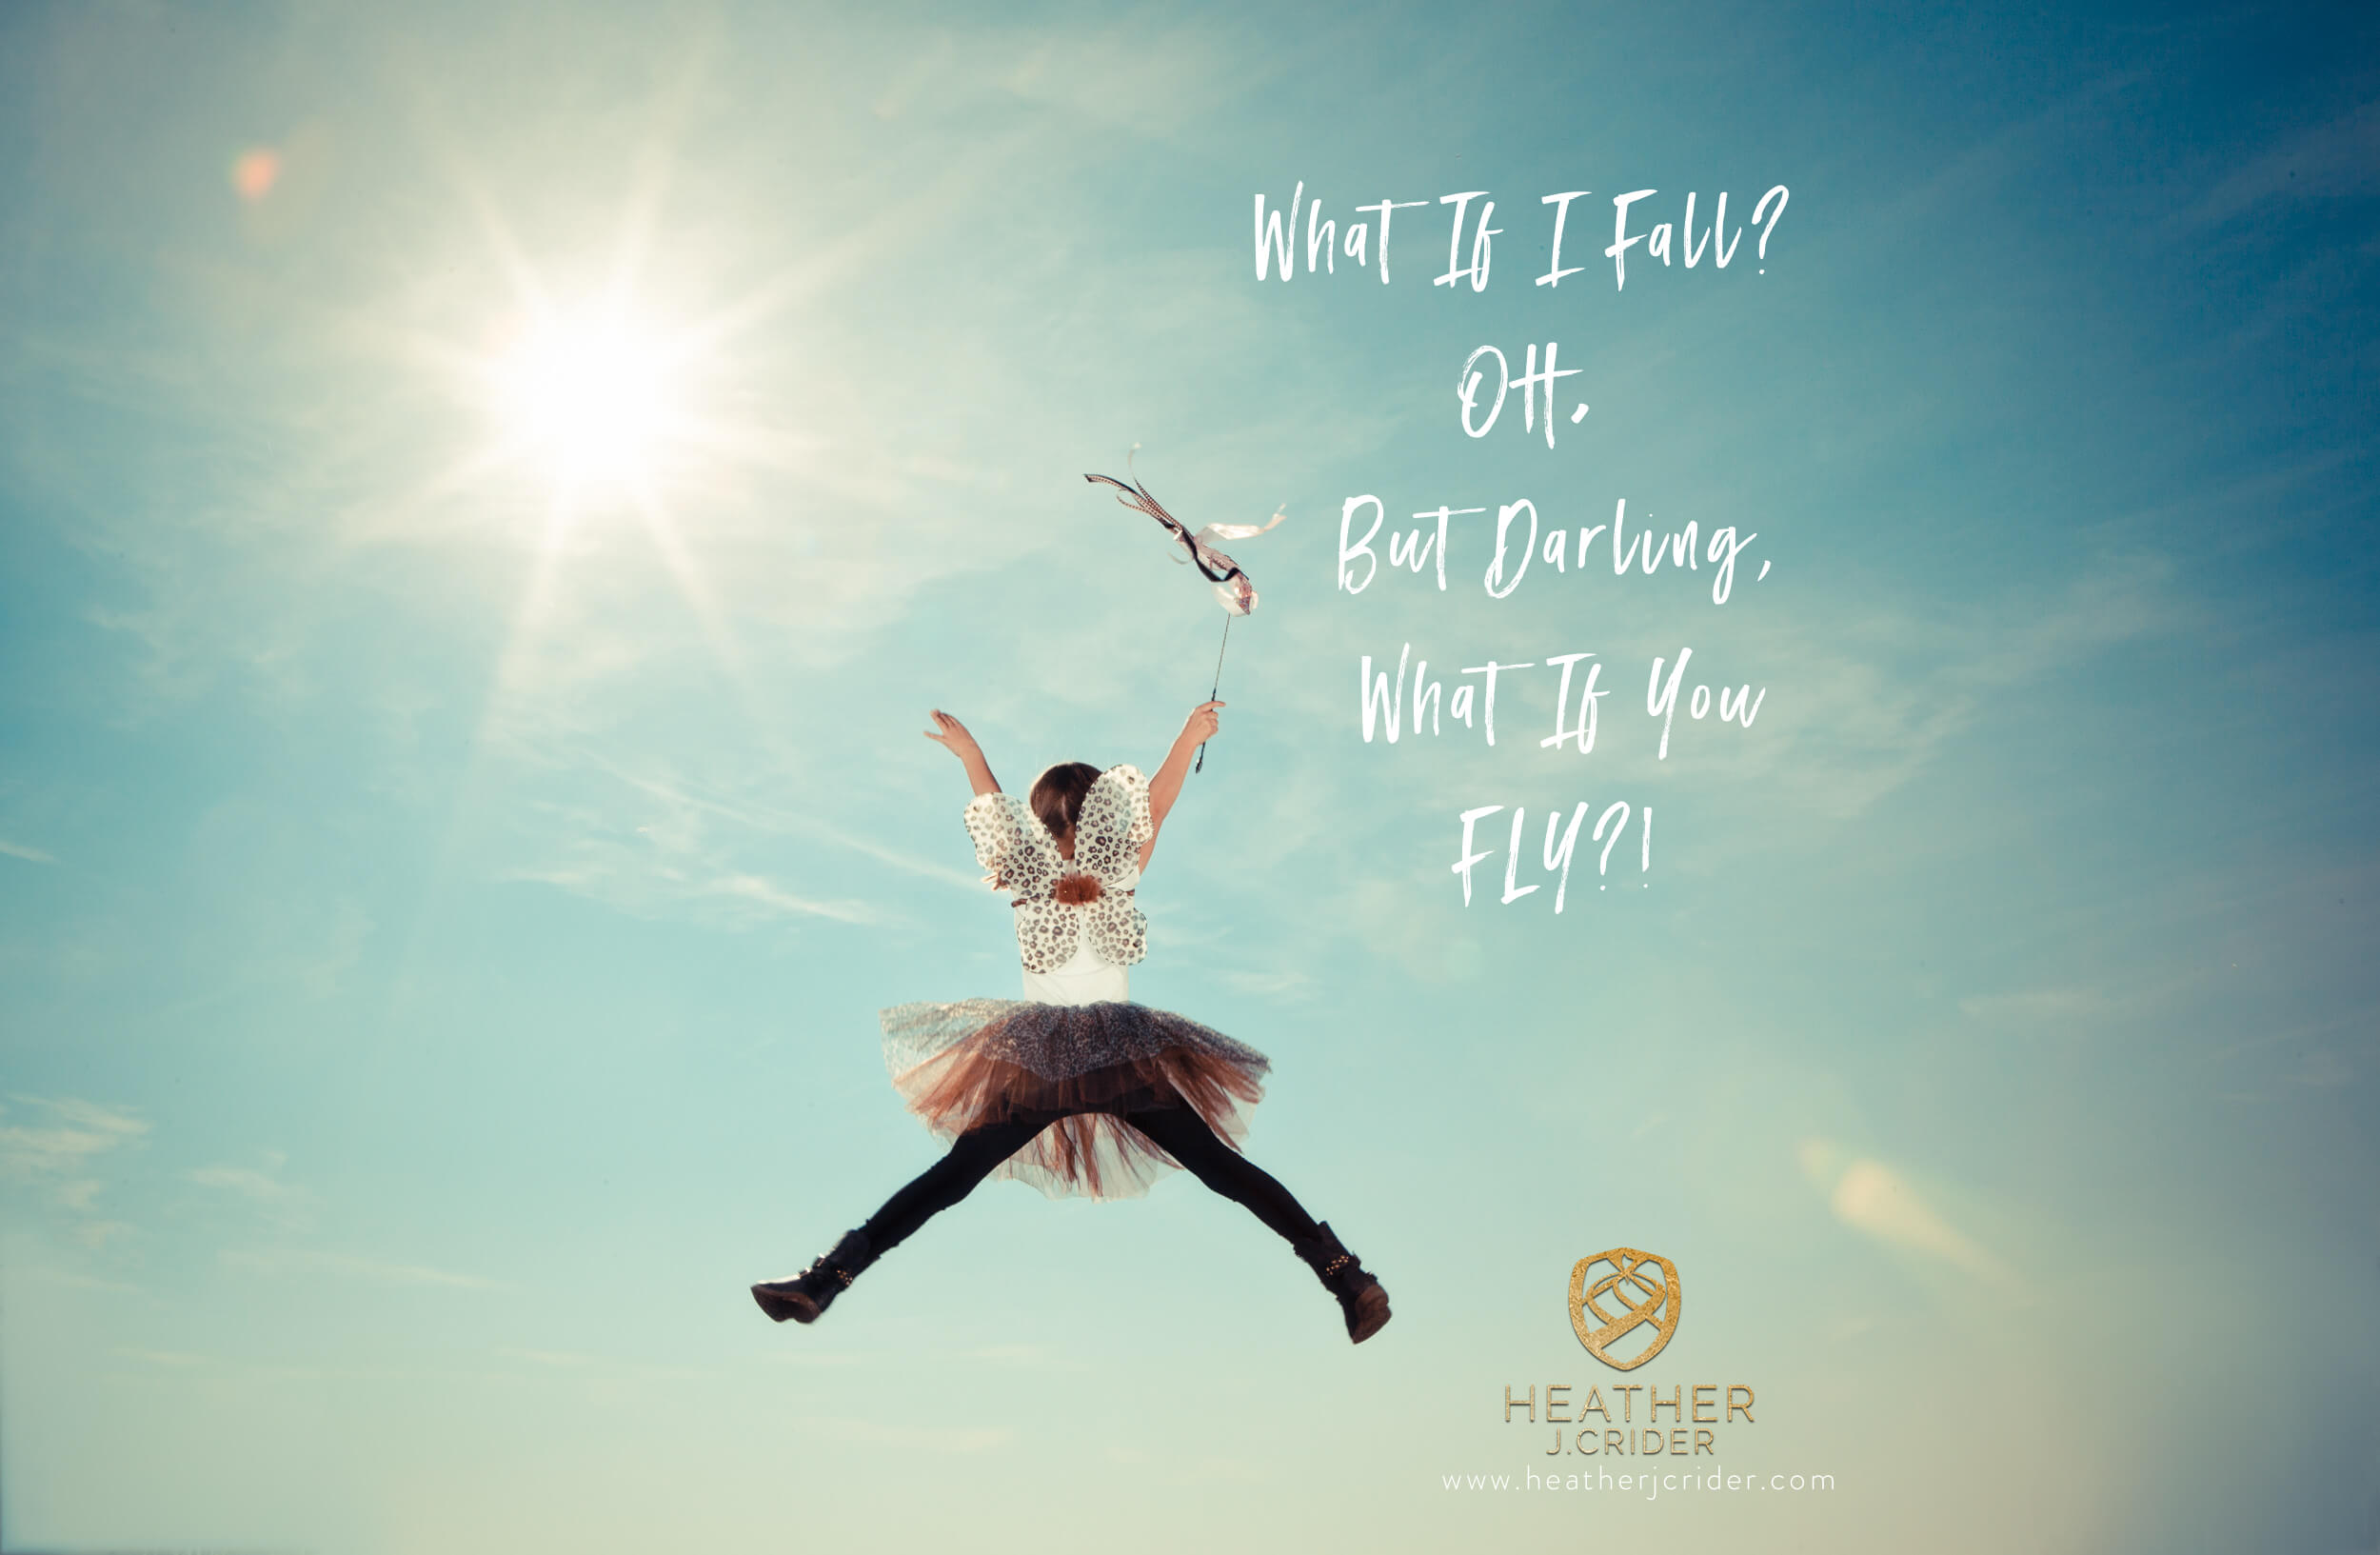 What If I Fall? OH, but my darling, what if you fly?! Heather Crider Blog Image